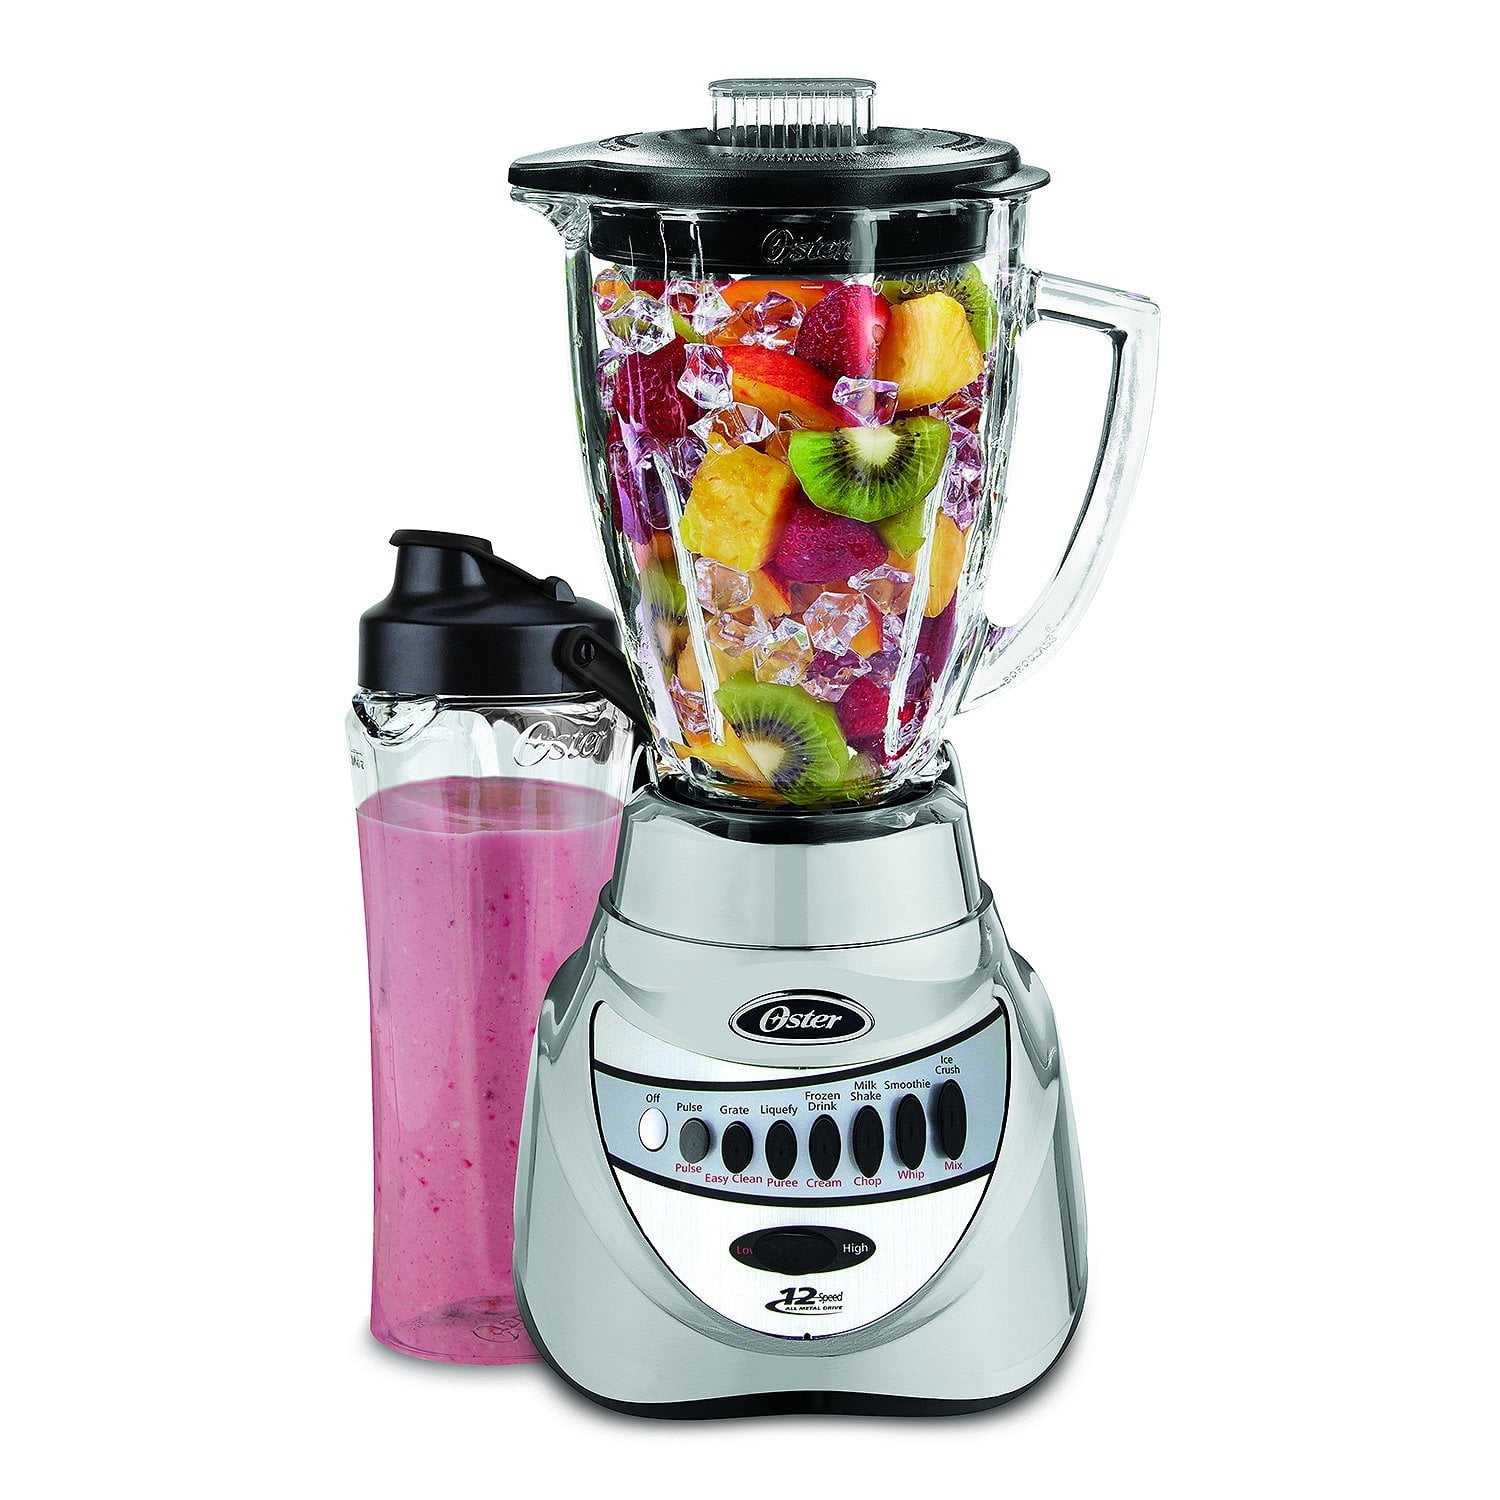 Meet your new BFF! The NEW Oster Actifit Personal Blender has a powerful  700 watt motor that effortlessly blends frozen fruits and veggies…